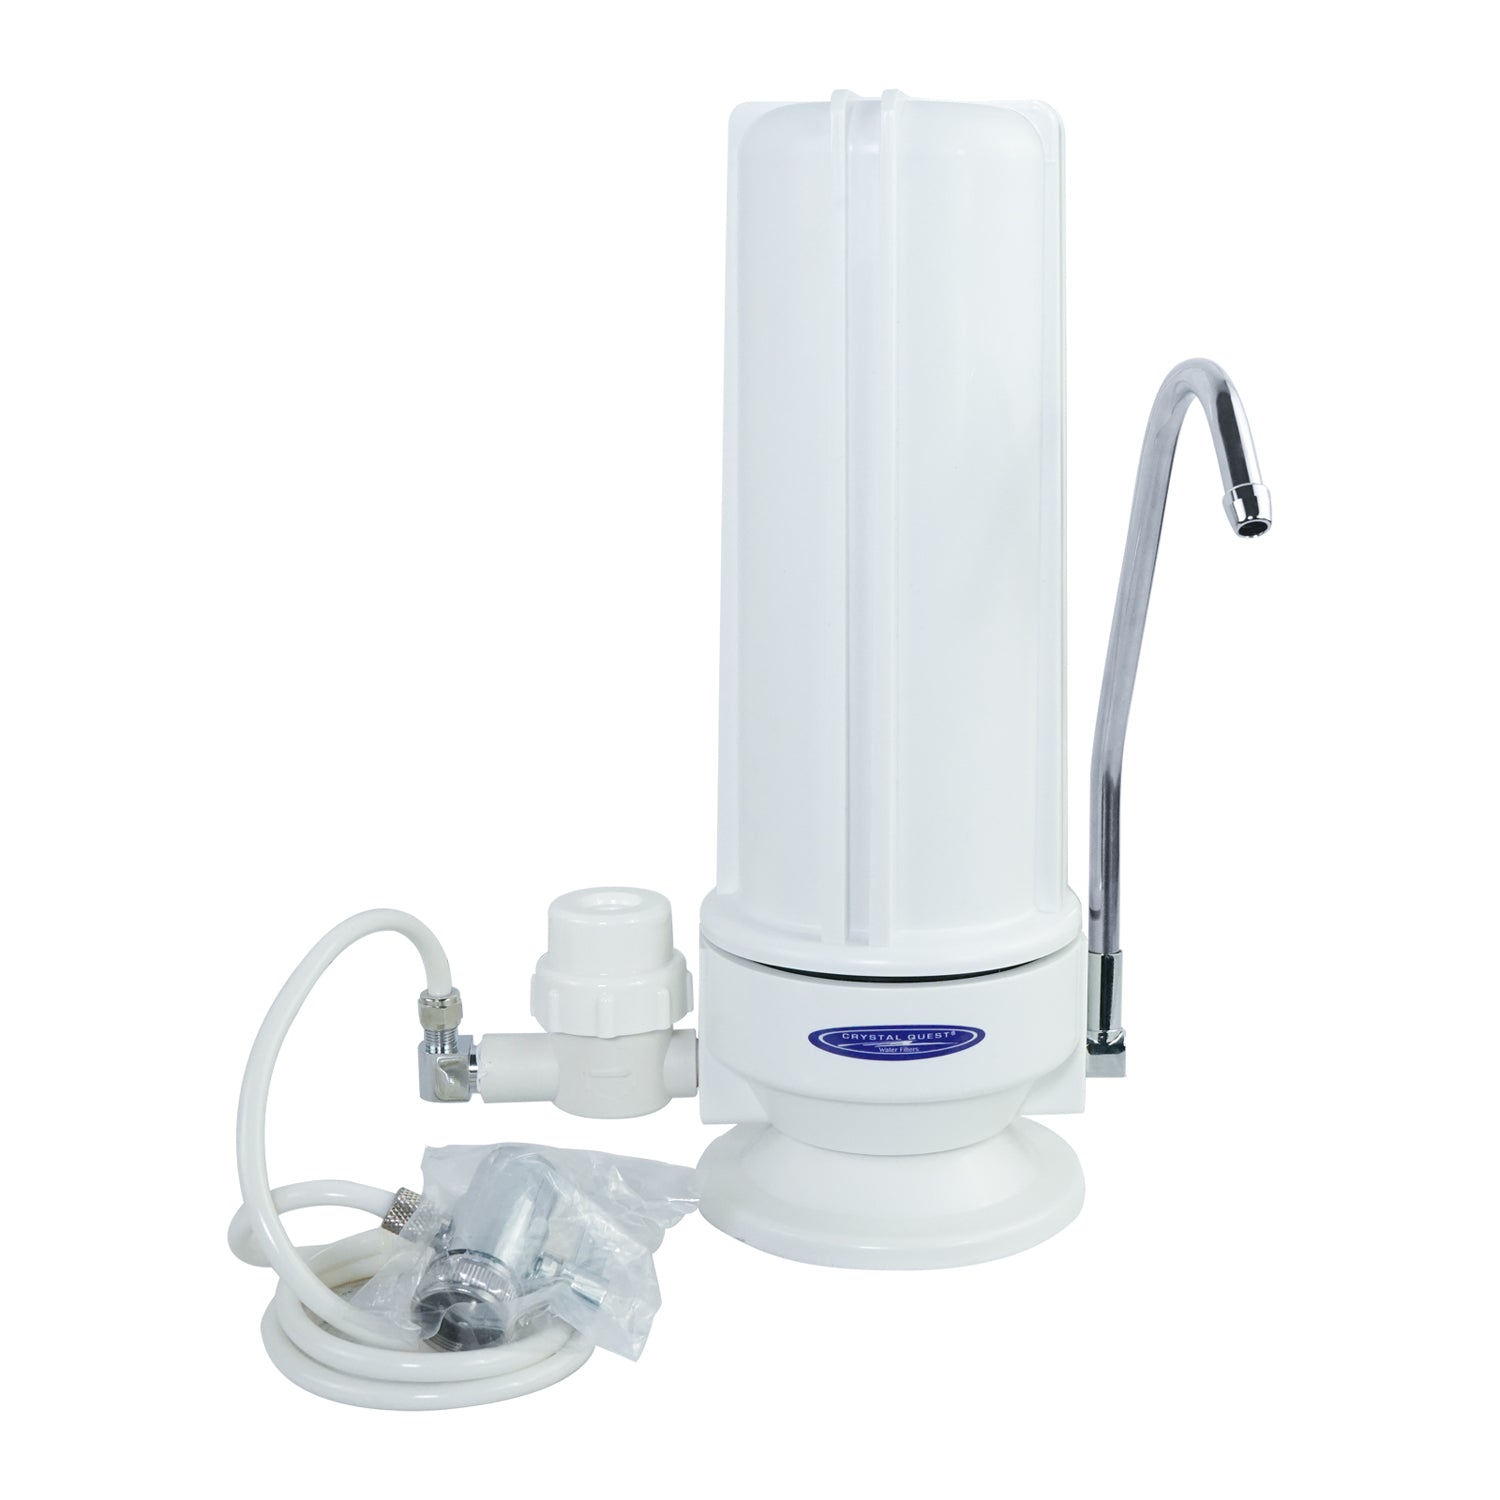 Lead Countertop Water Filter System - Countertop Water Filters - Crystal Quest